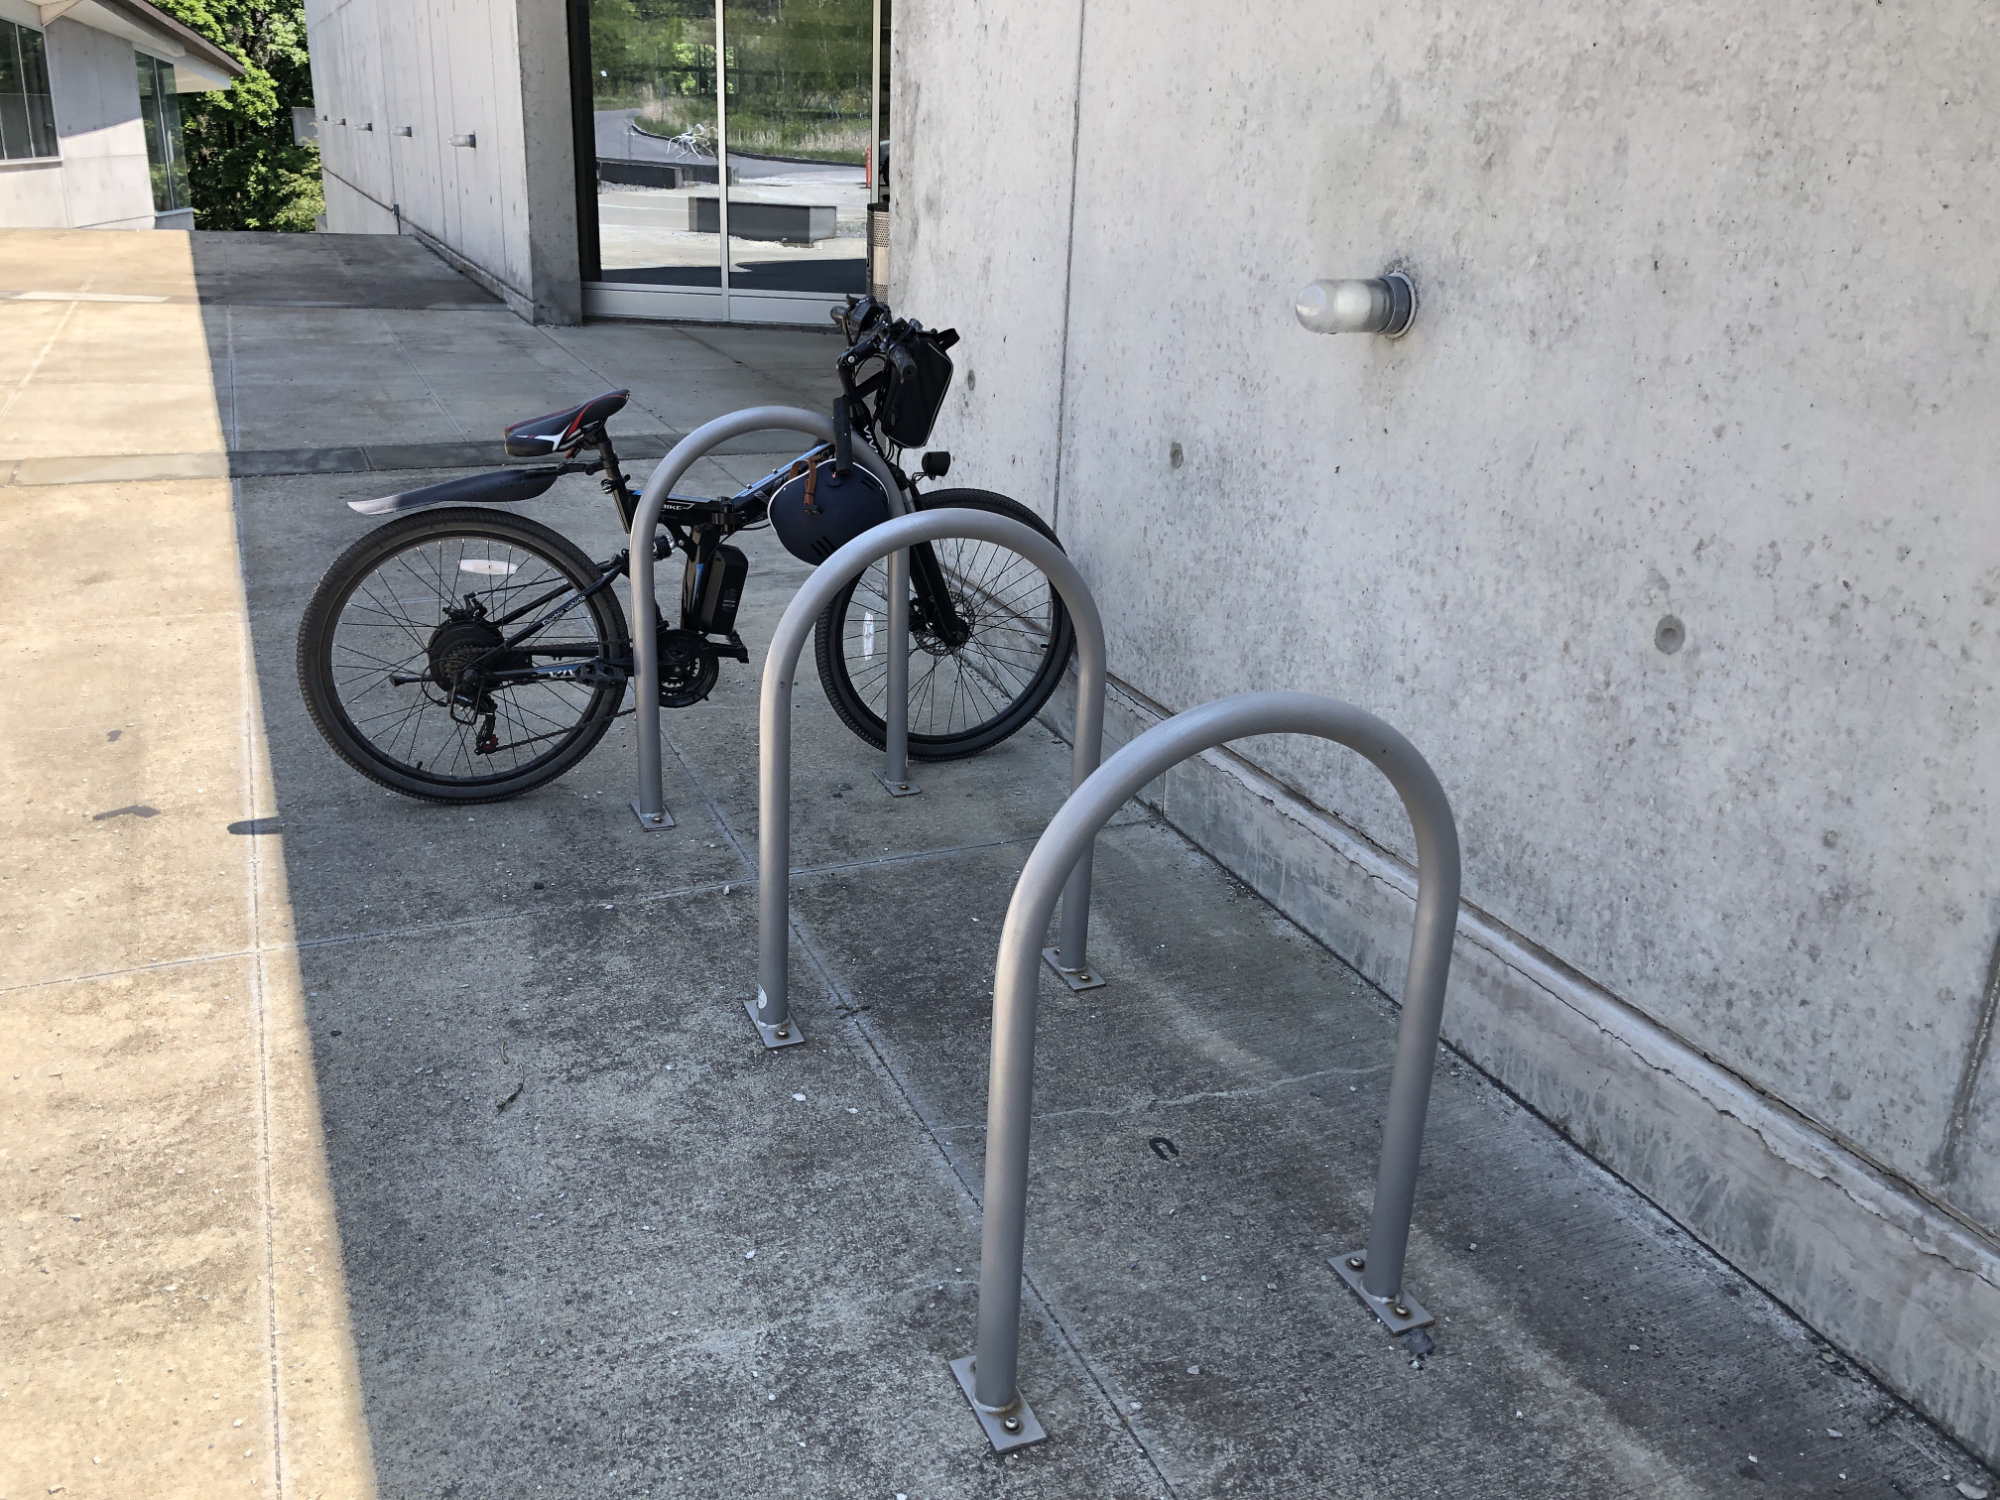 Photo of a bicycle attached to a bike rack outside a building.